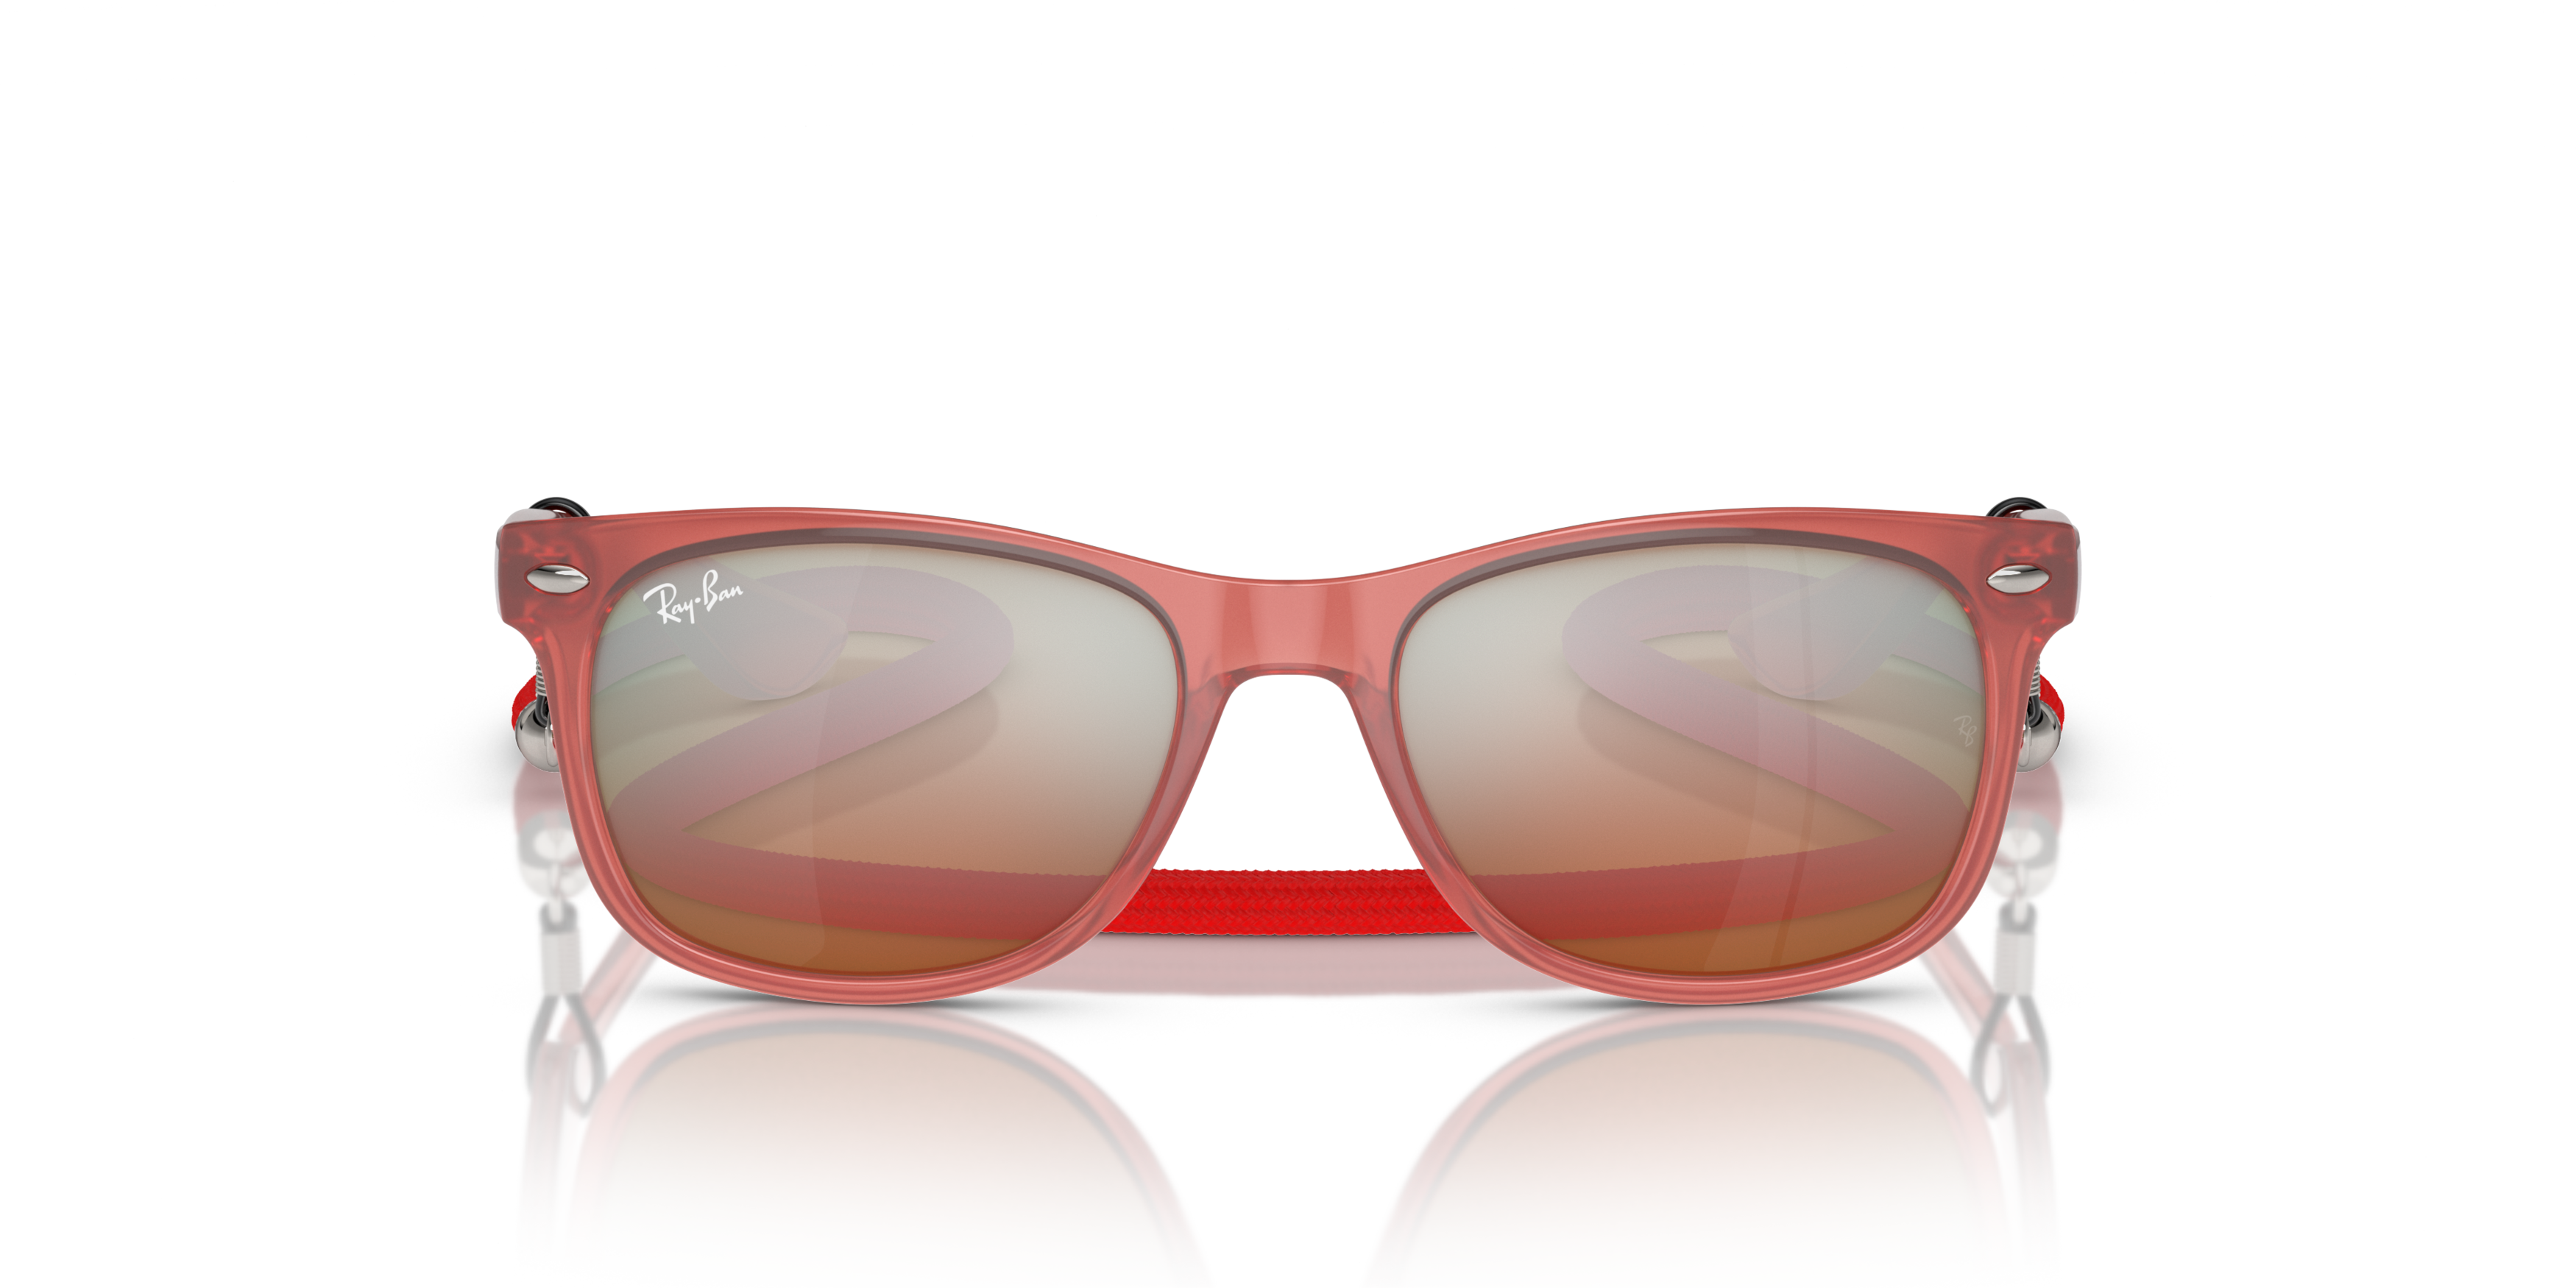 Front Ray-Ban RJ9052S Children's Sunglasses Silver / Transparent, Red